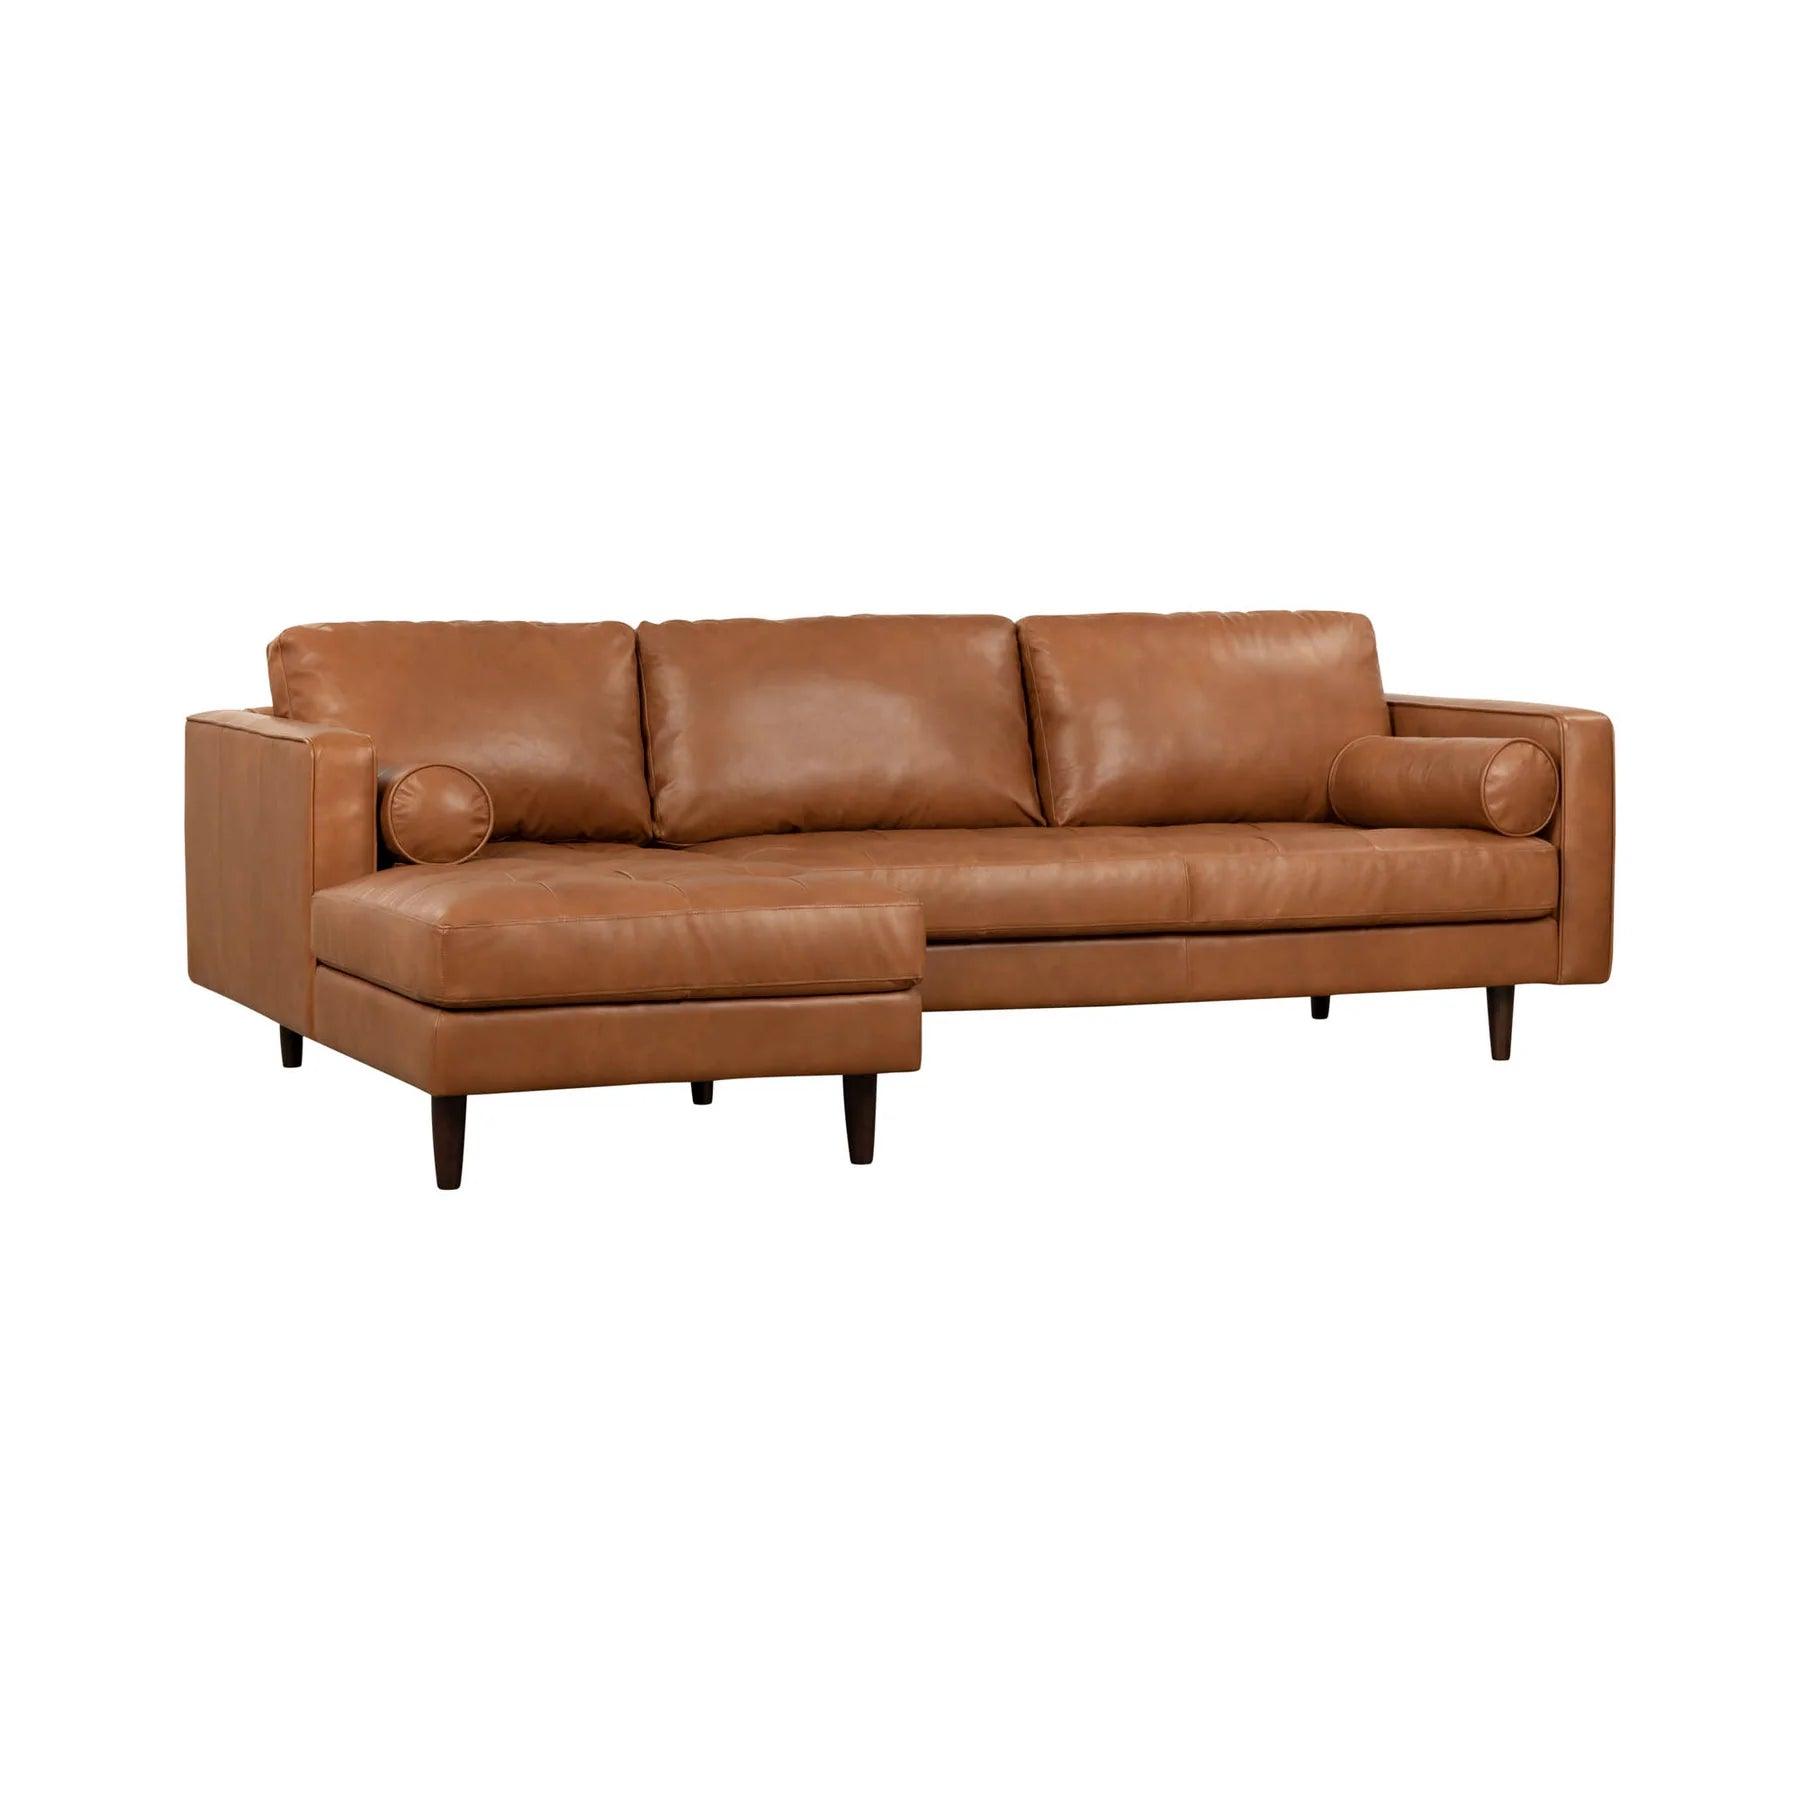 GEORGIA Genuine Leather Sectional Sofa - Oxford Spice - Northern Interiors